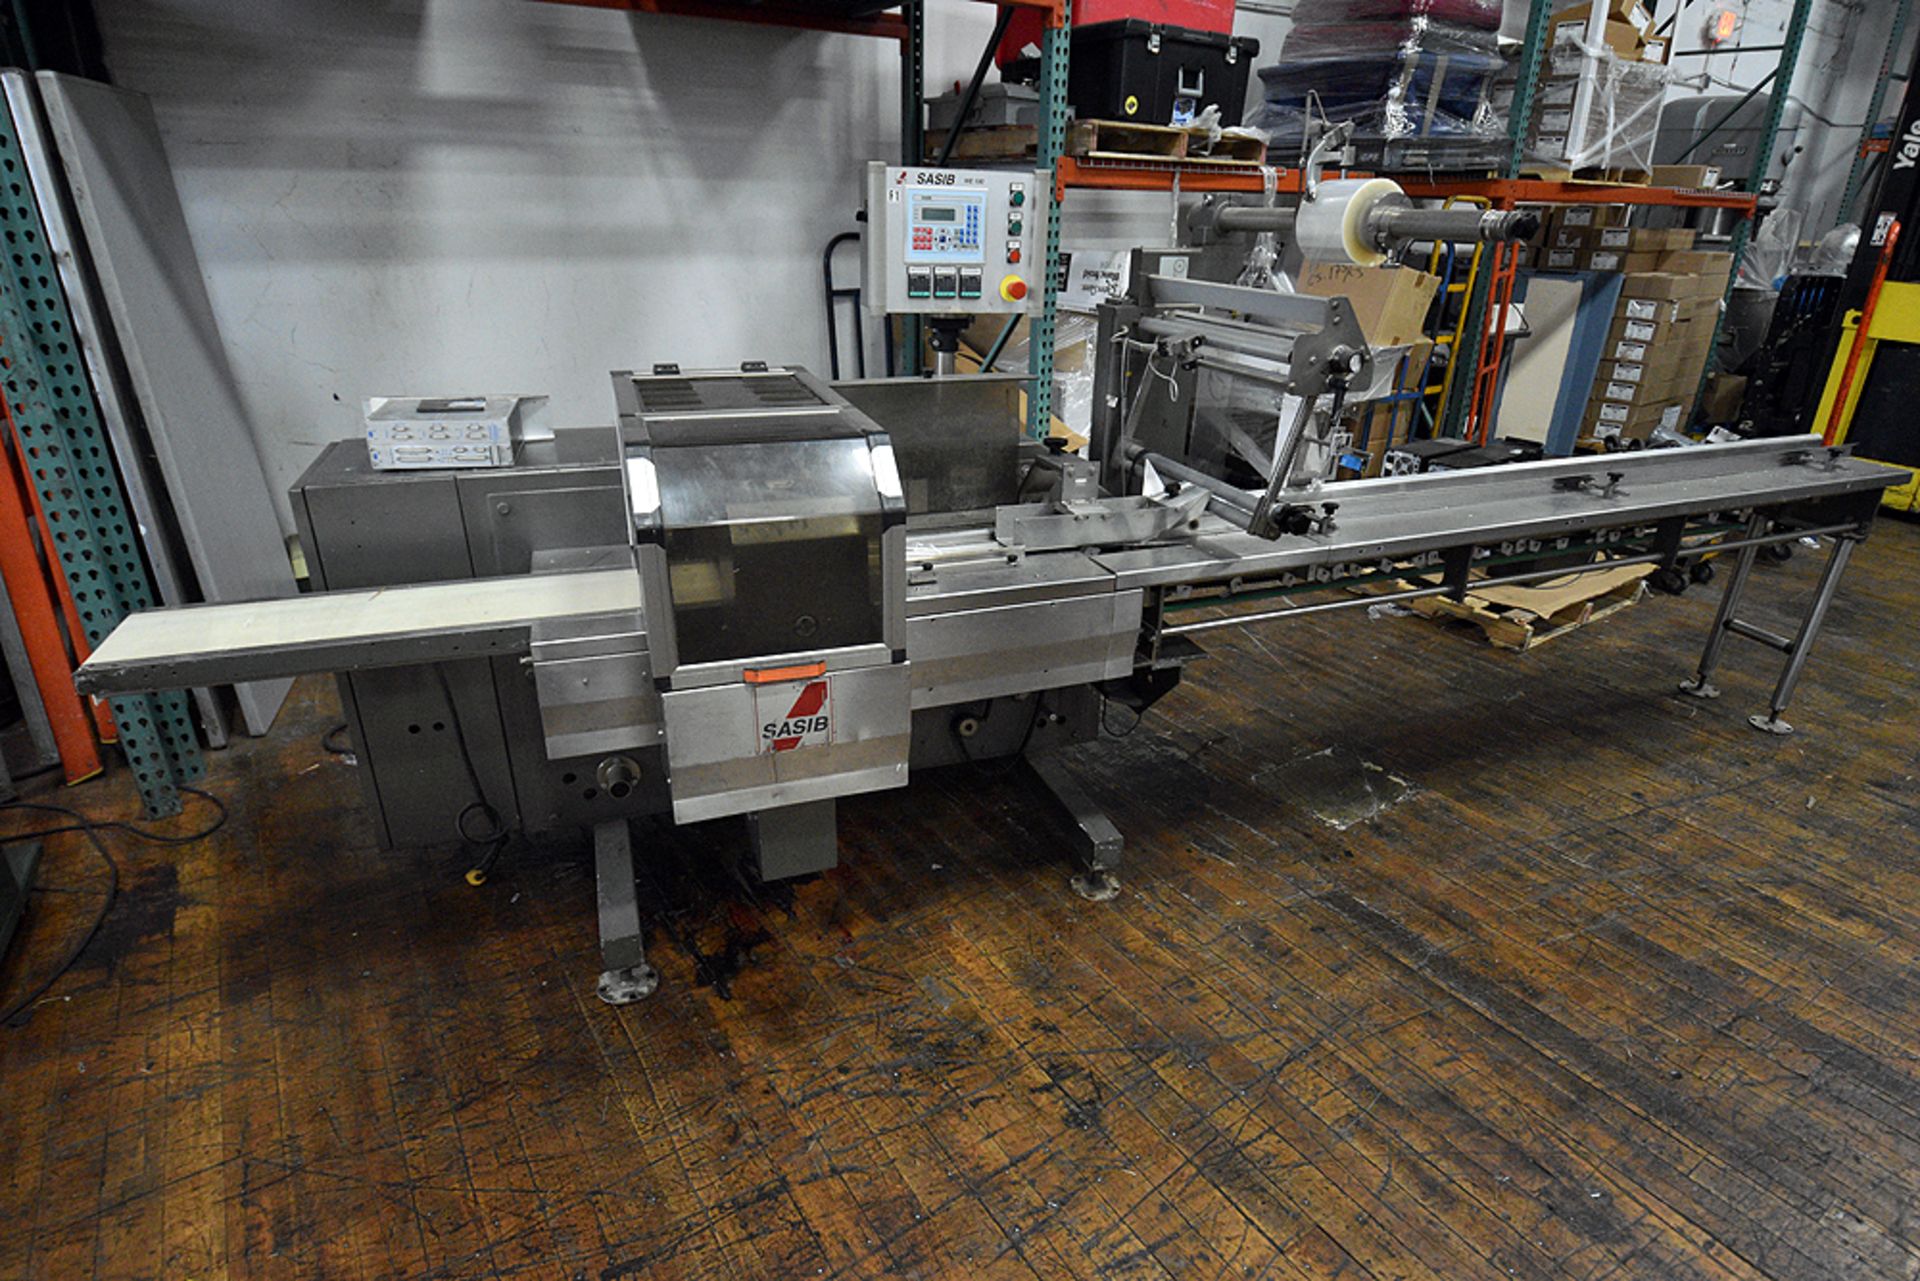 Sasib WE-150 Multi-Axis Horizontal Flo-Wrapper Line w/Attachments (See Pictures for Reference)